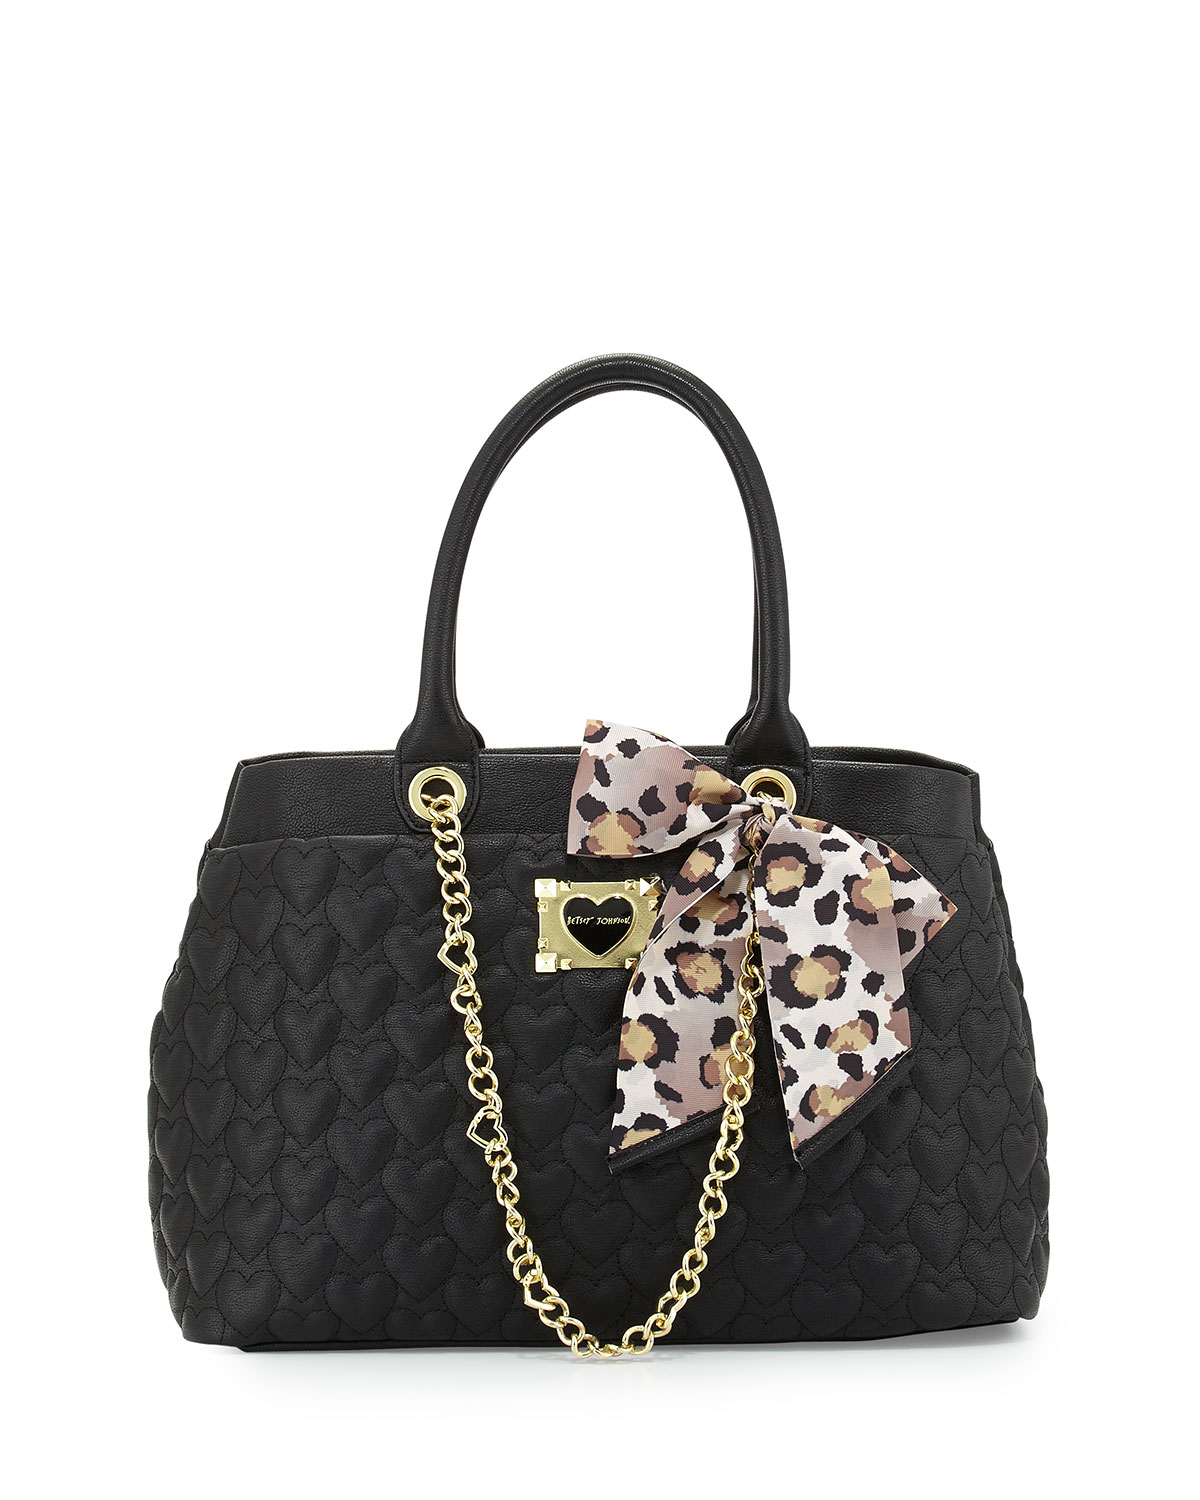 Lyst - Betsey Johnson Heart-Quilted Tote Bag in Black